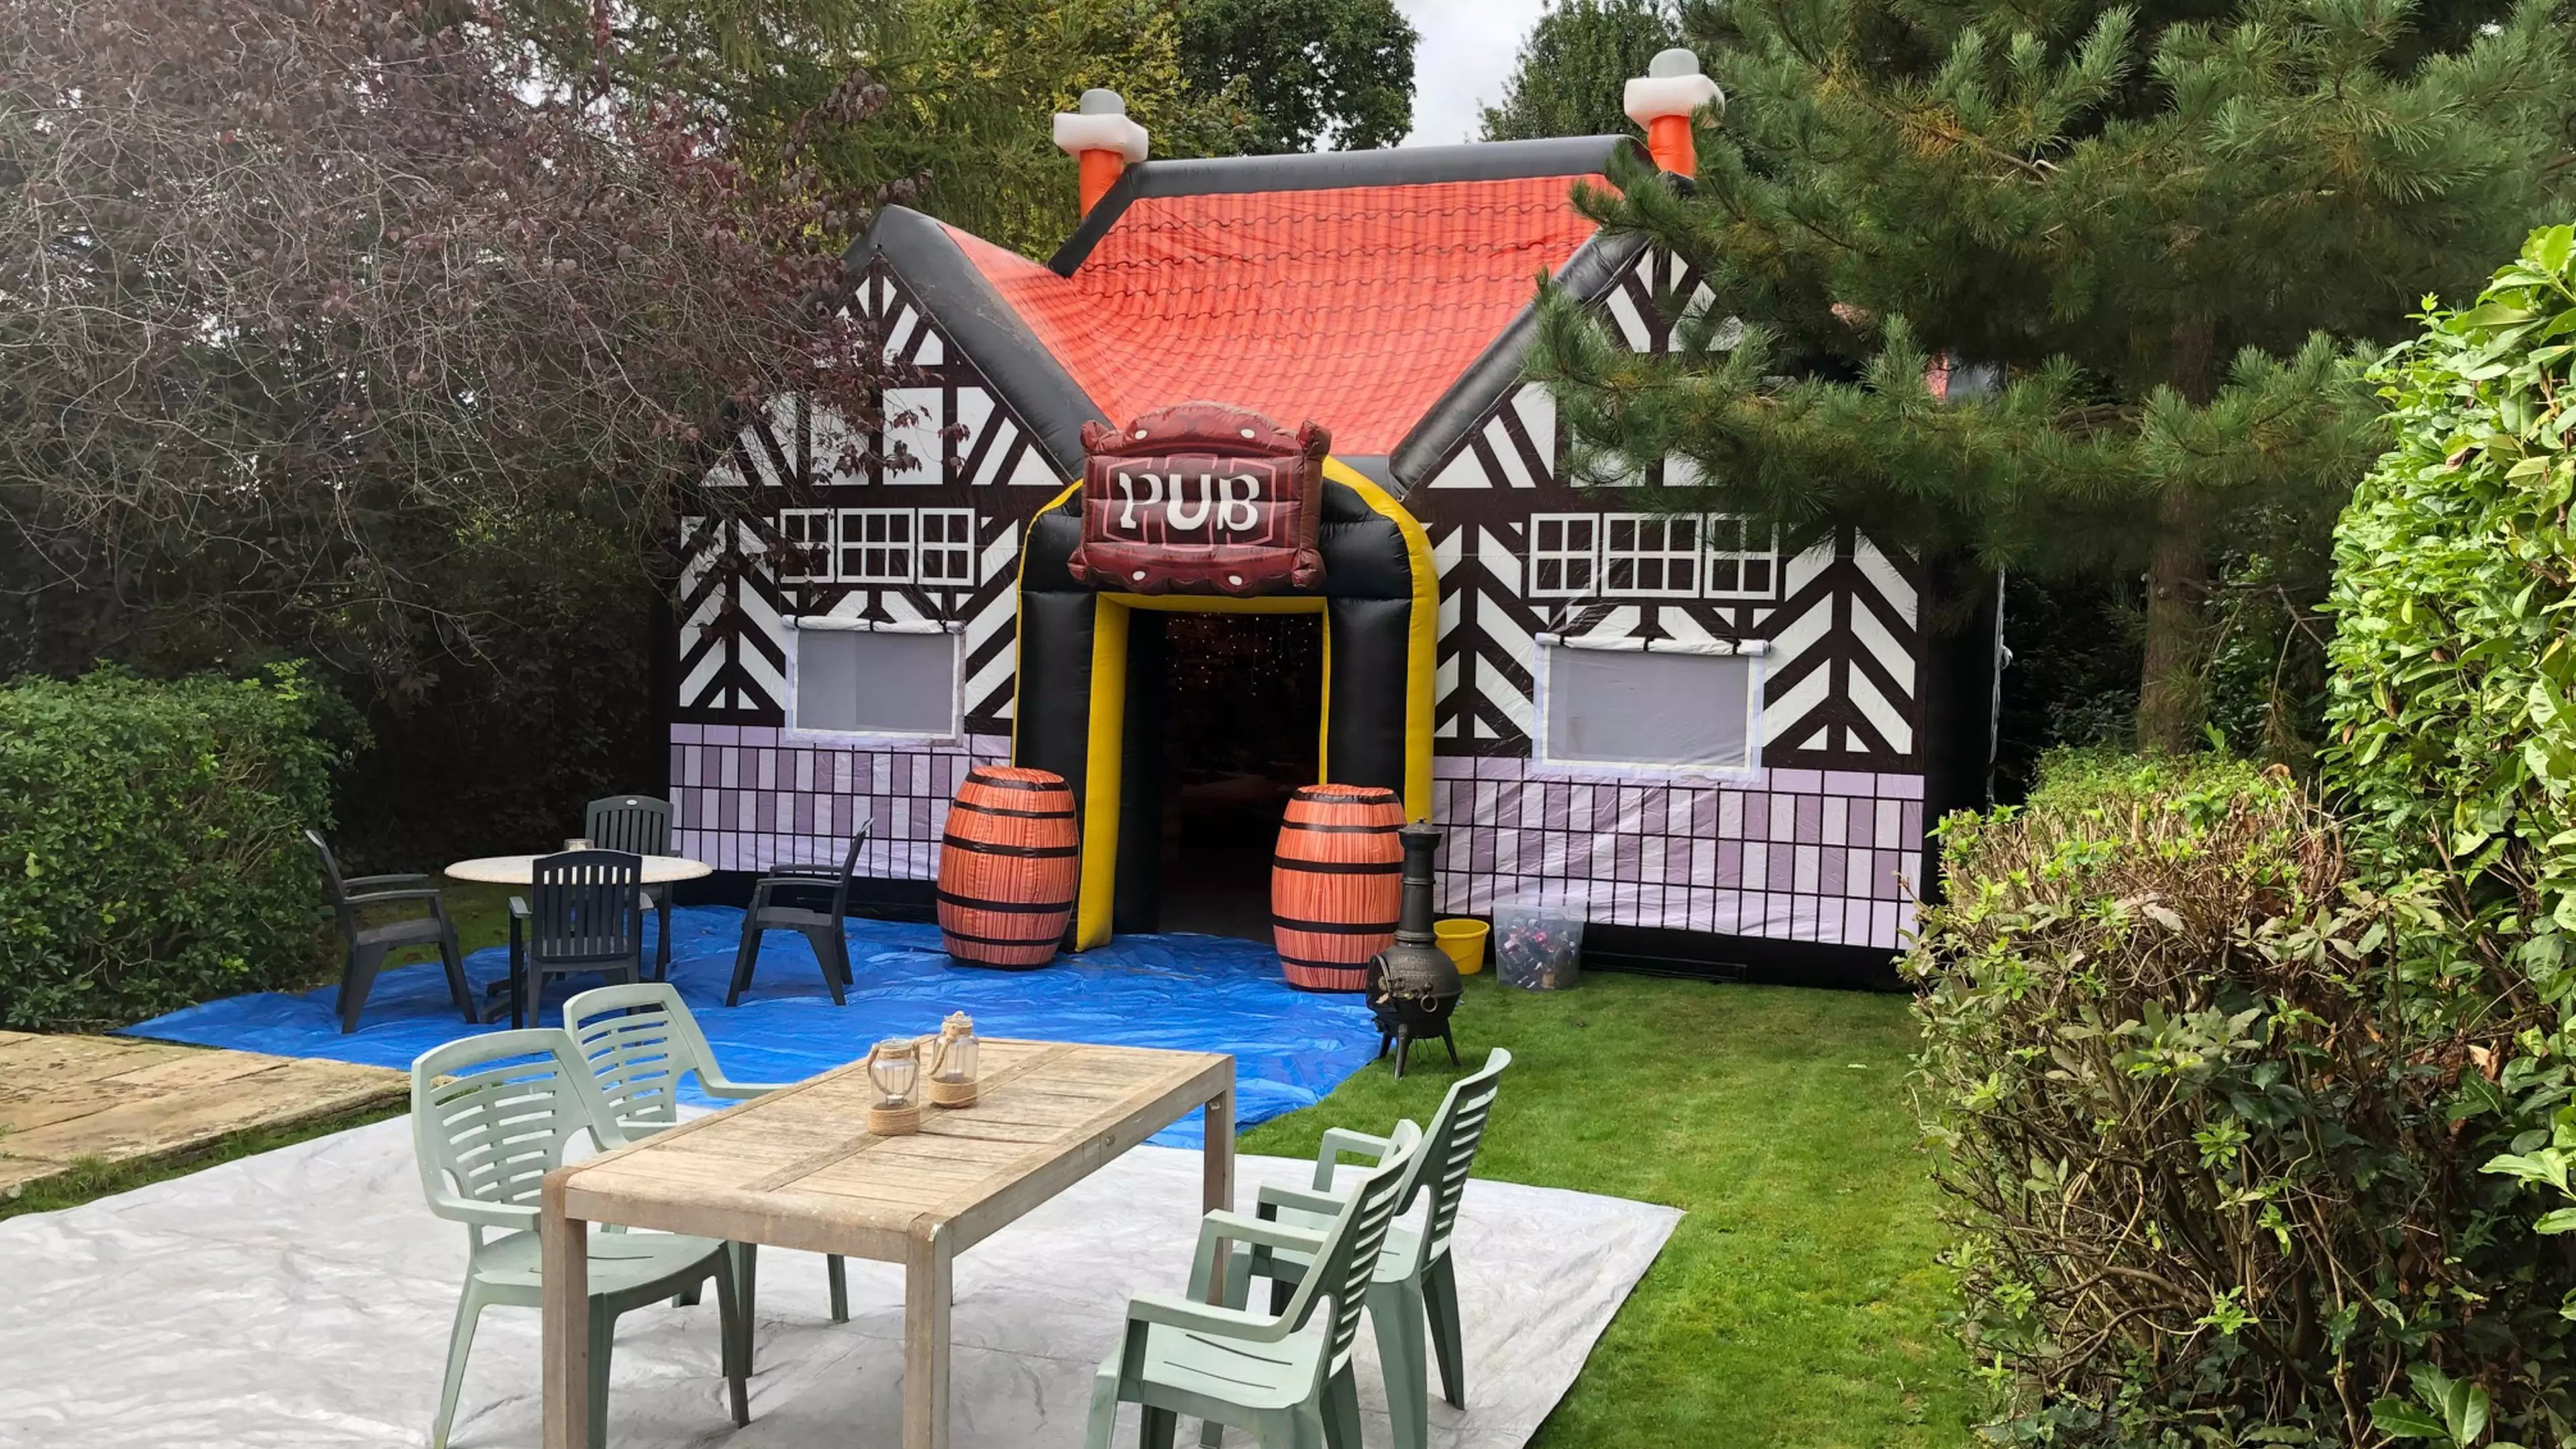 You Can Now Hire An Inflatable Pub For Your Garden